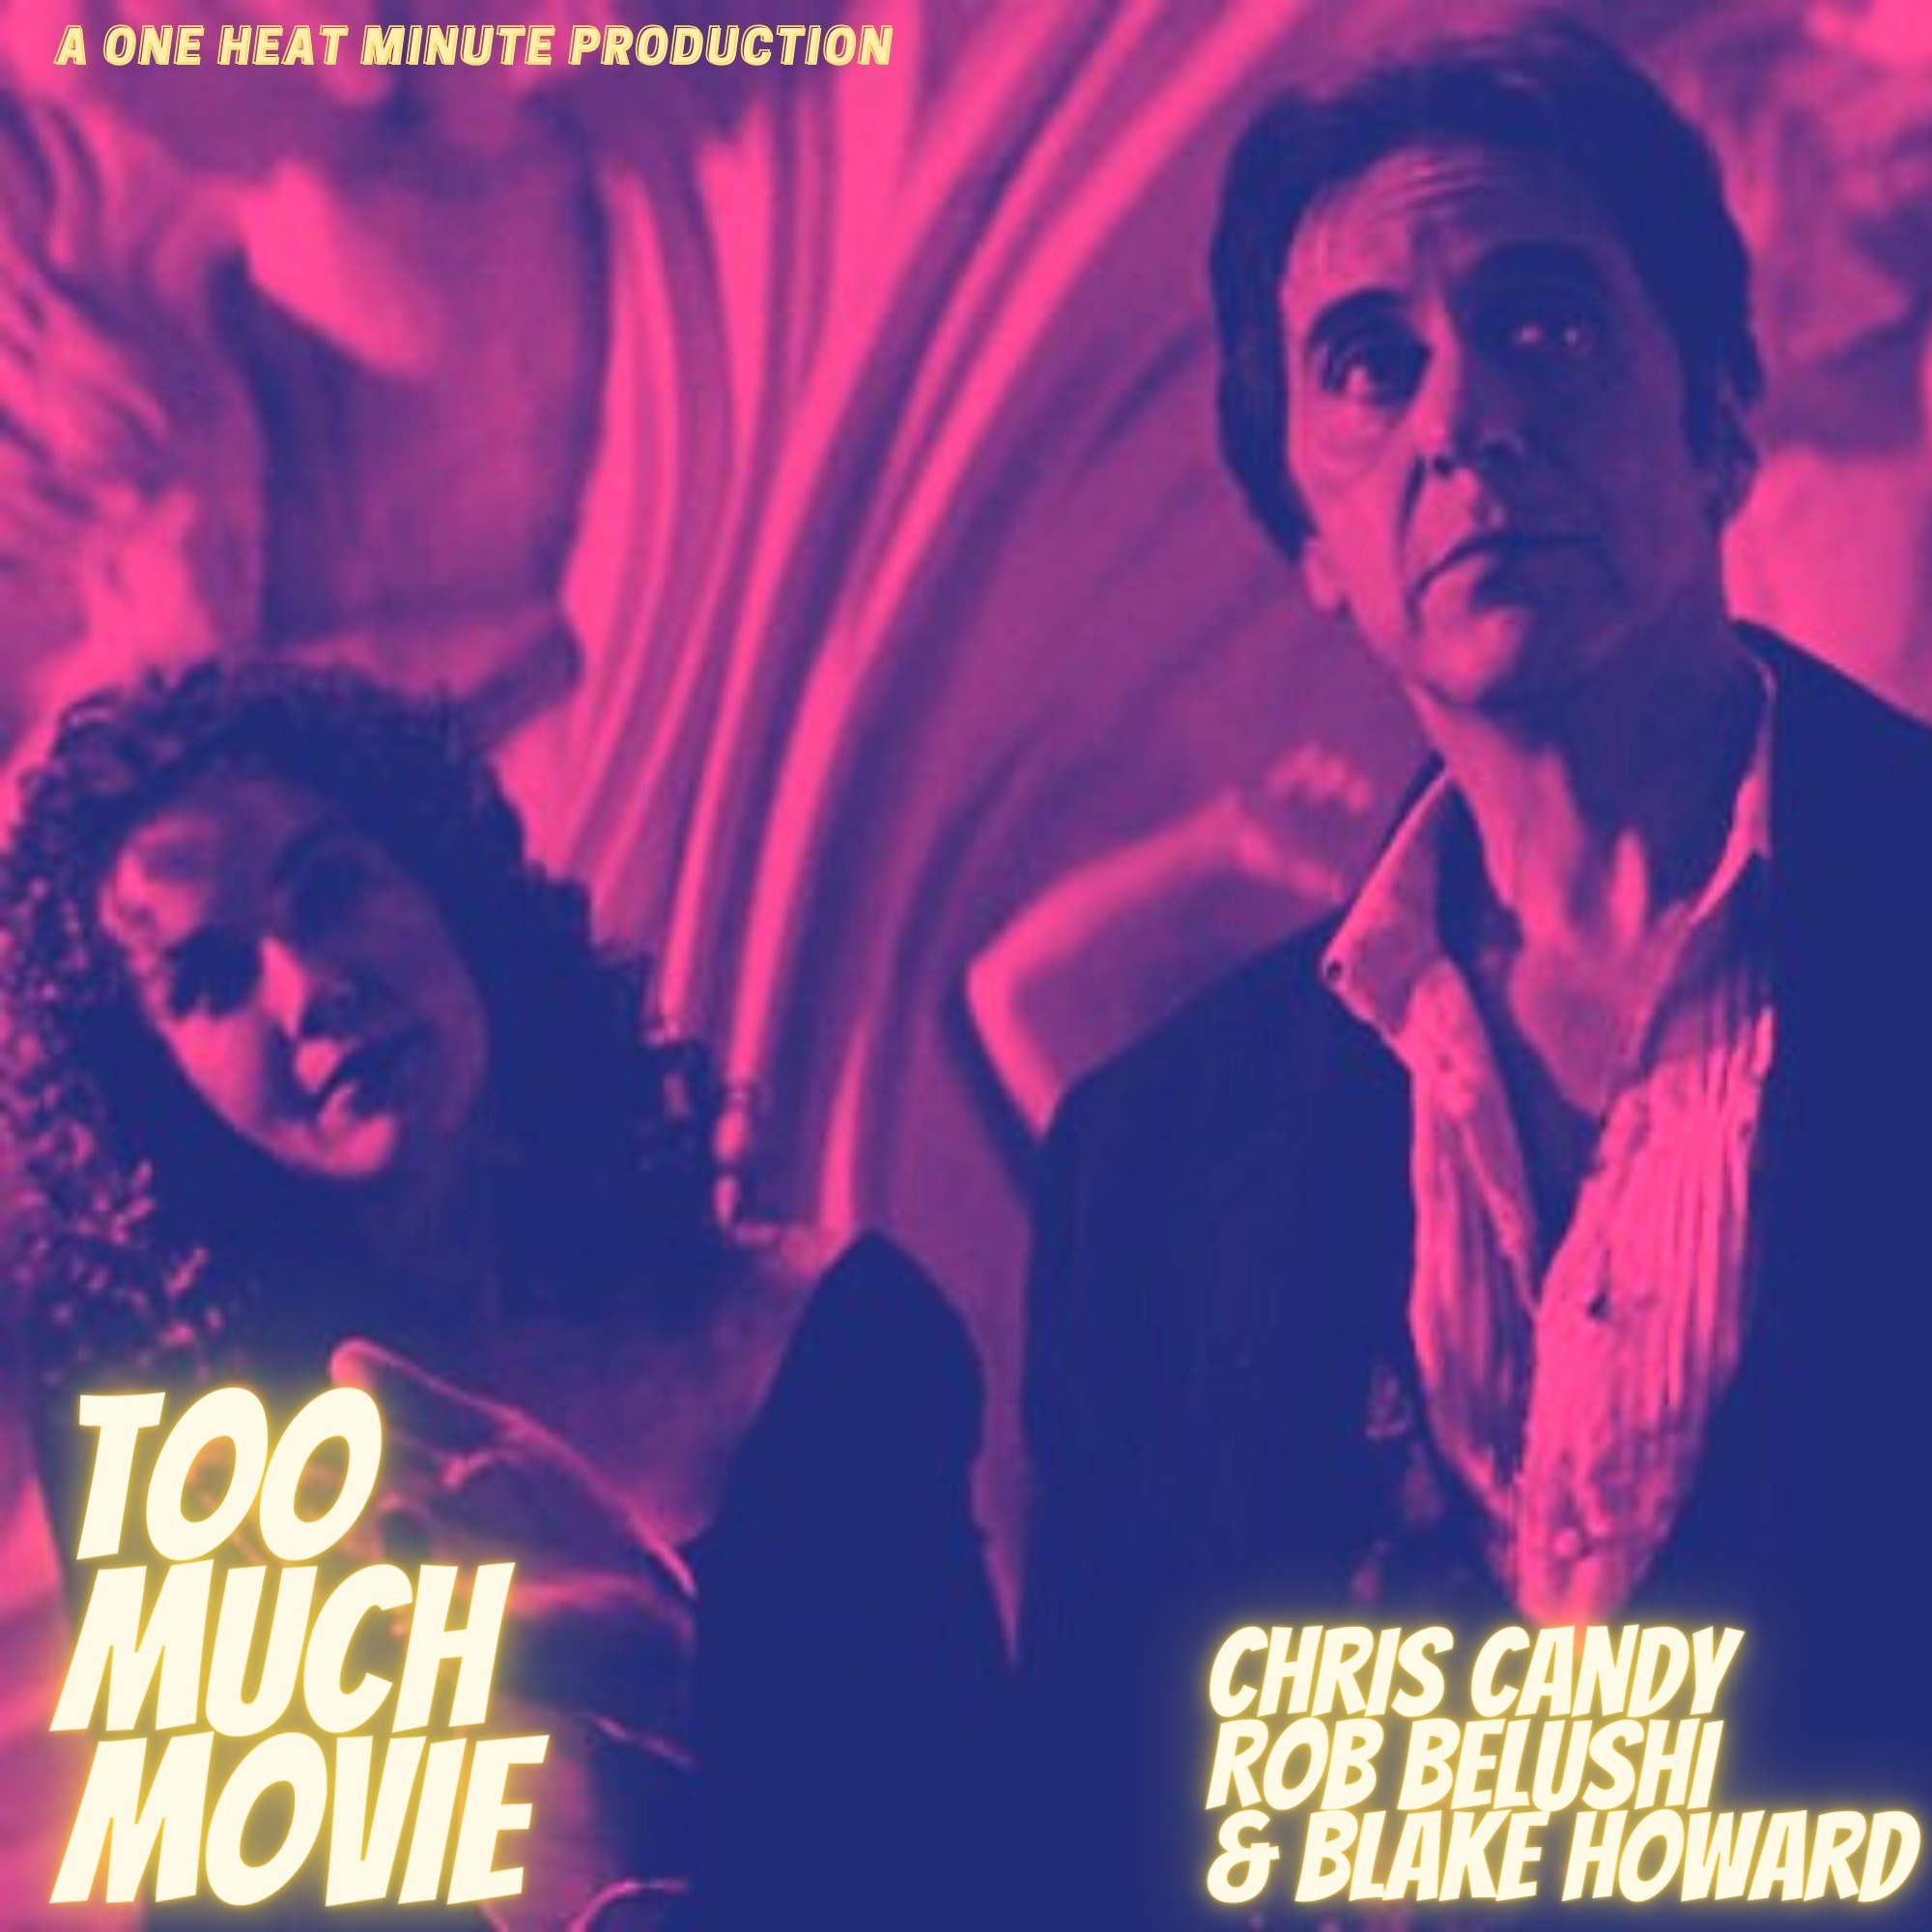 TOO MUCH MOVIE: THE DEVIL’S ADVOCATE